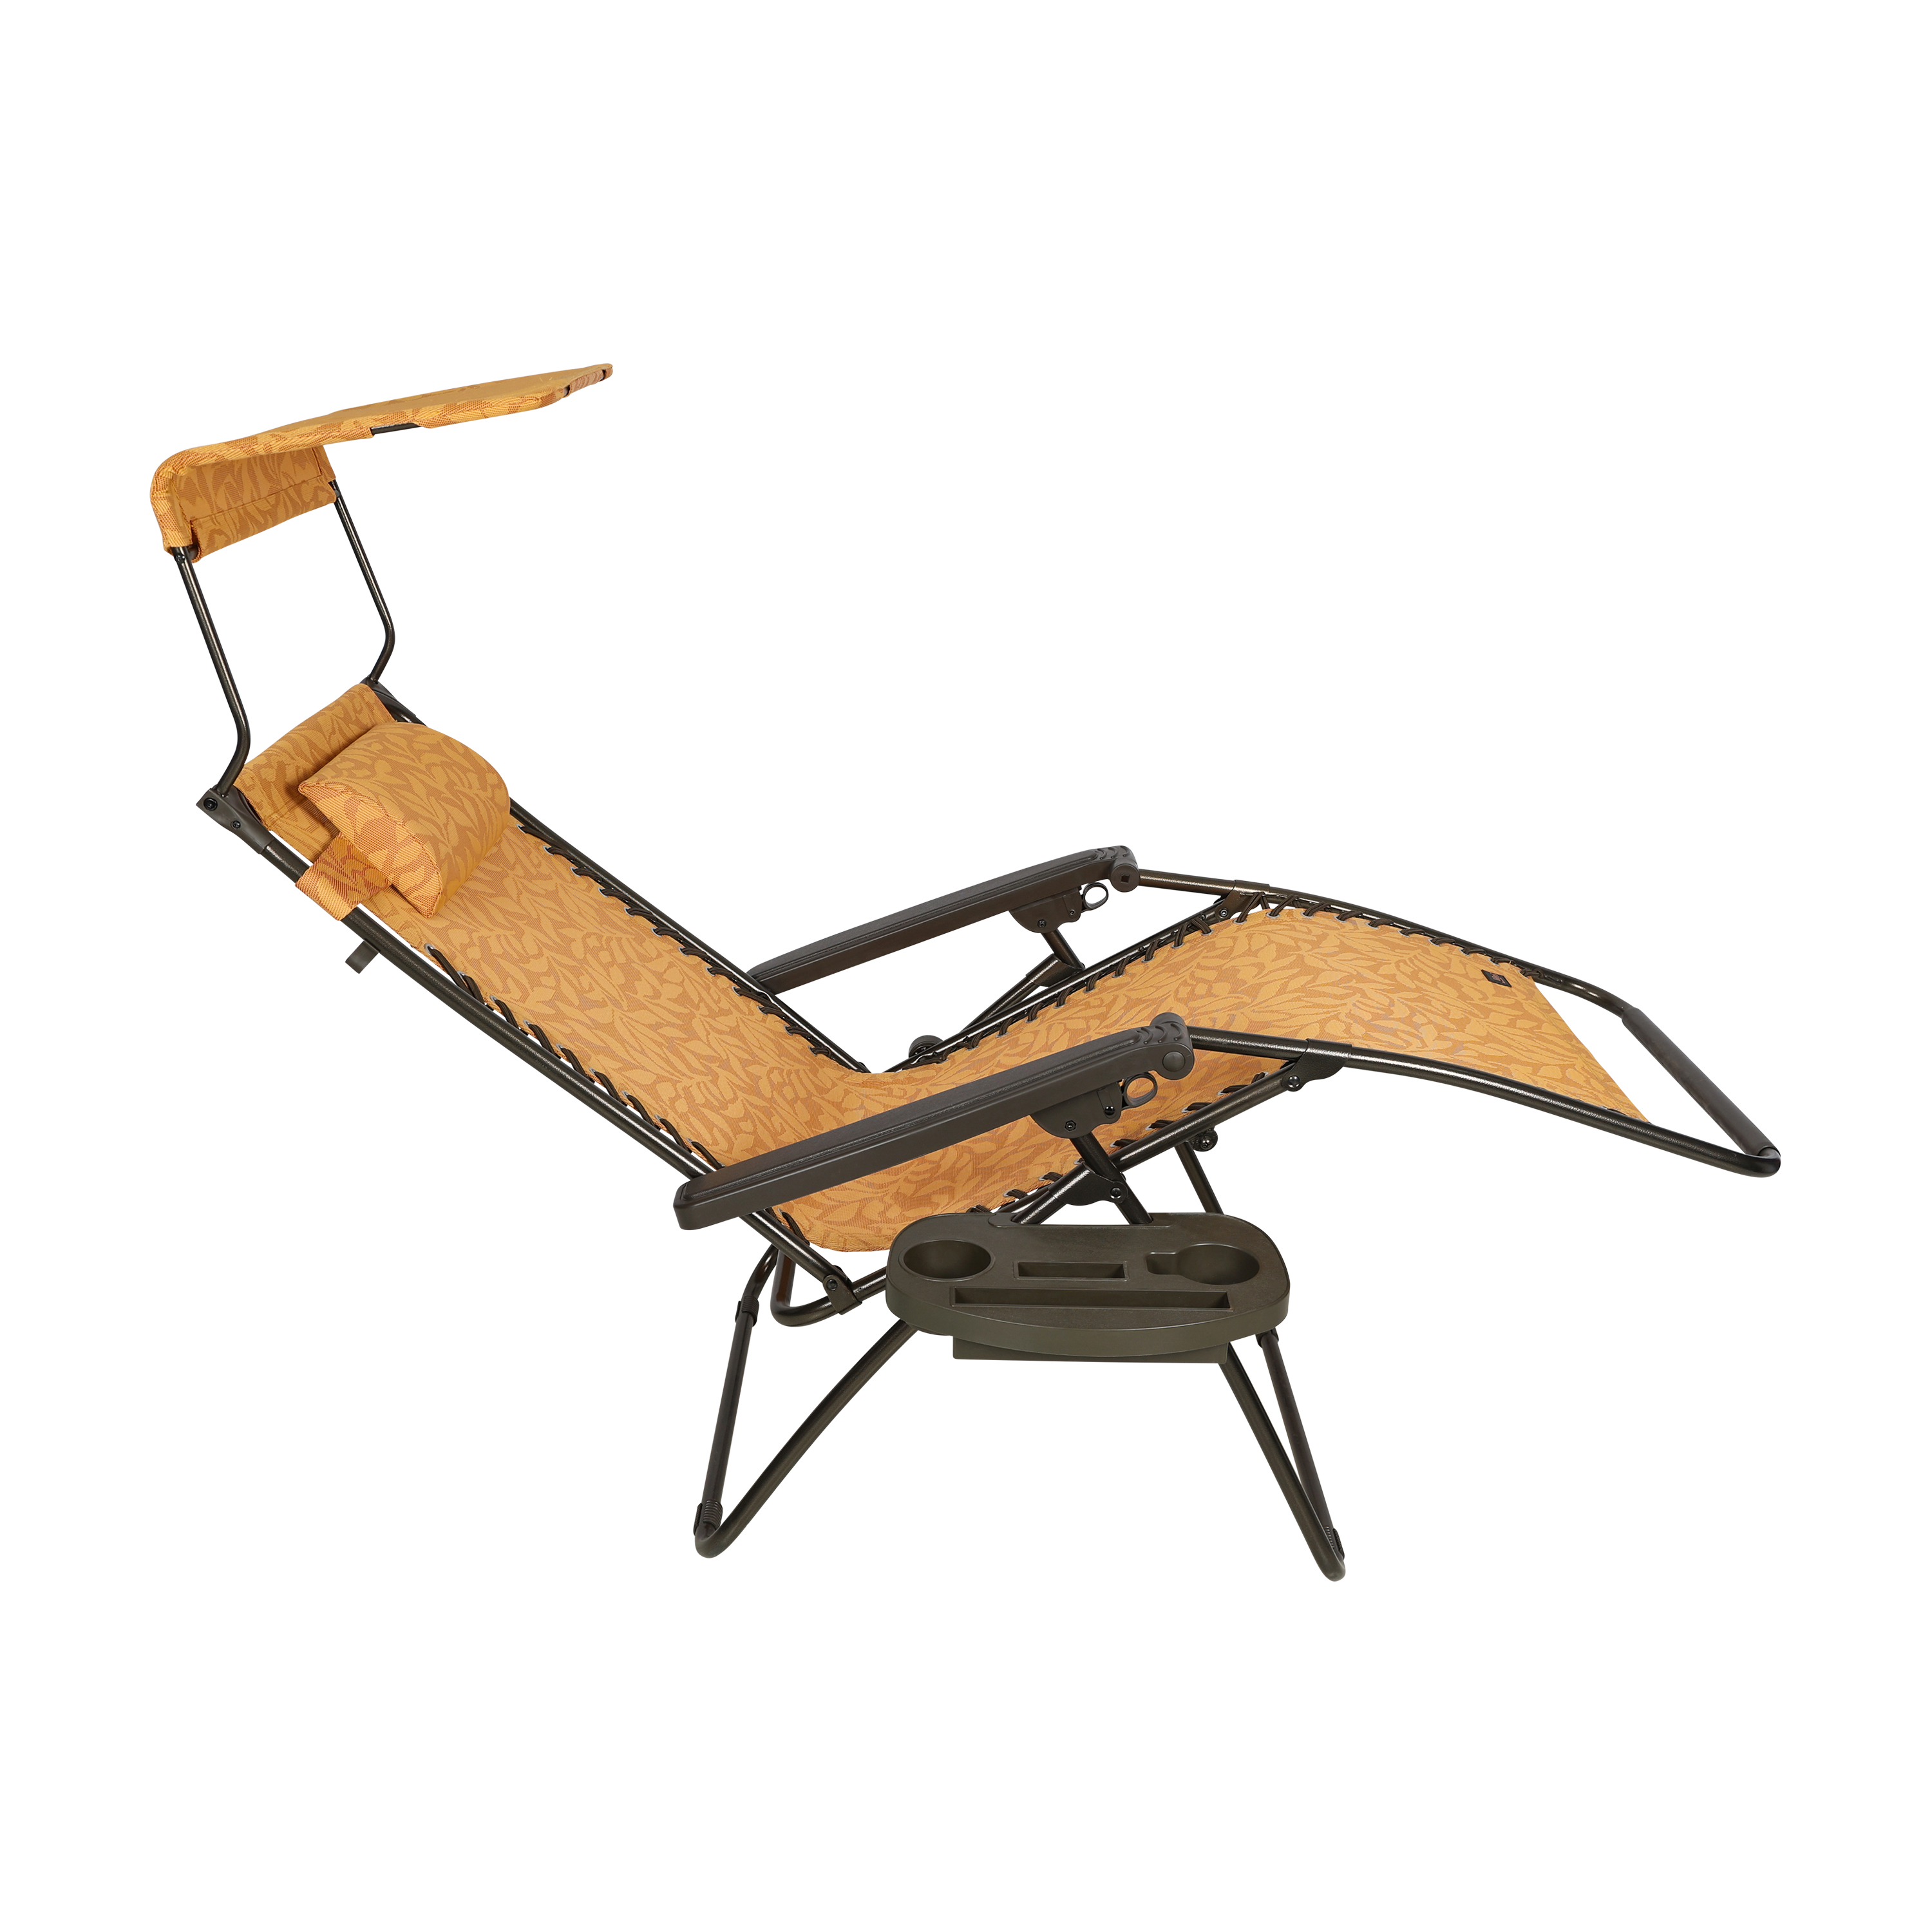 Bliss Hammocks 26" Wide Zero Gravity Chair w/ Adjustable Canopy Sun-Shade, Drink Tray, & Adjustable Pillow, 300 Lbs Capacity (Amber Leaf) - image 3 of 4